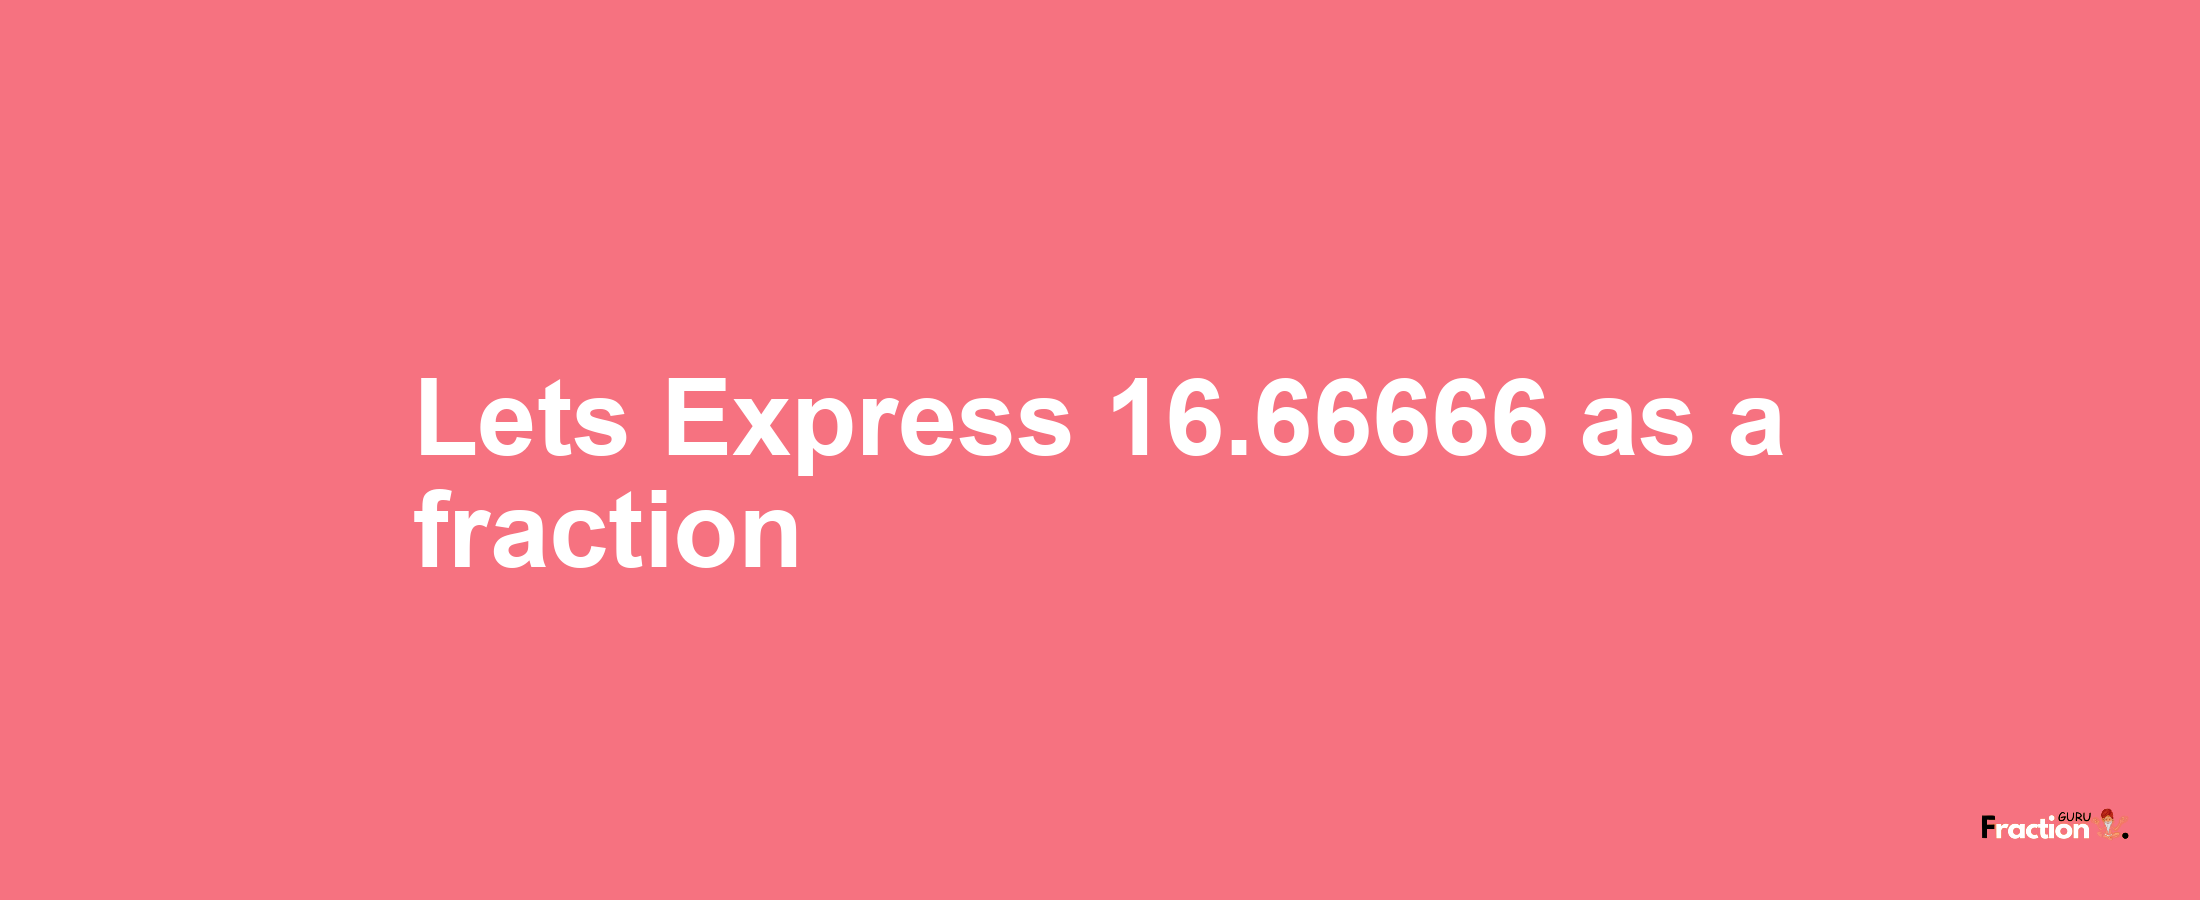 Lets Express 16.66666 as afraction